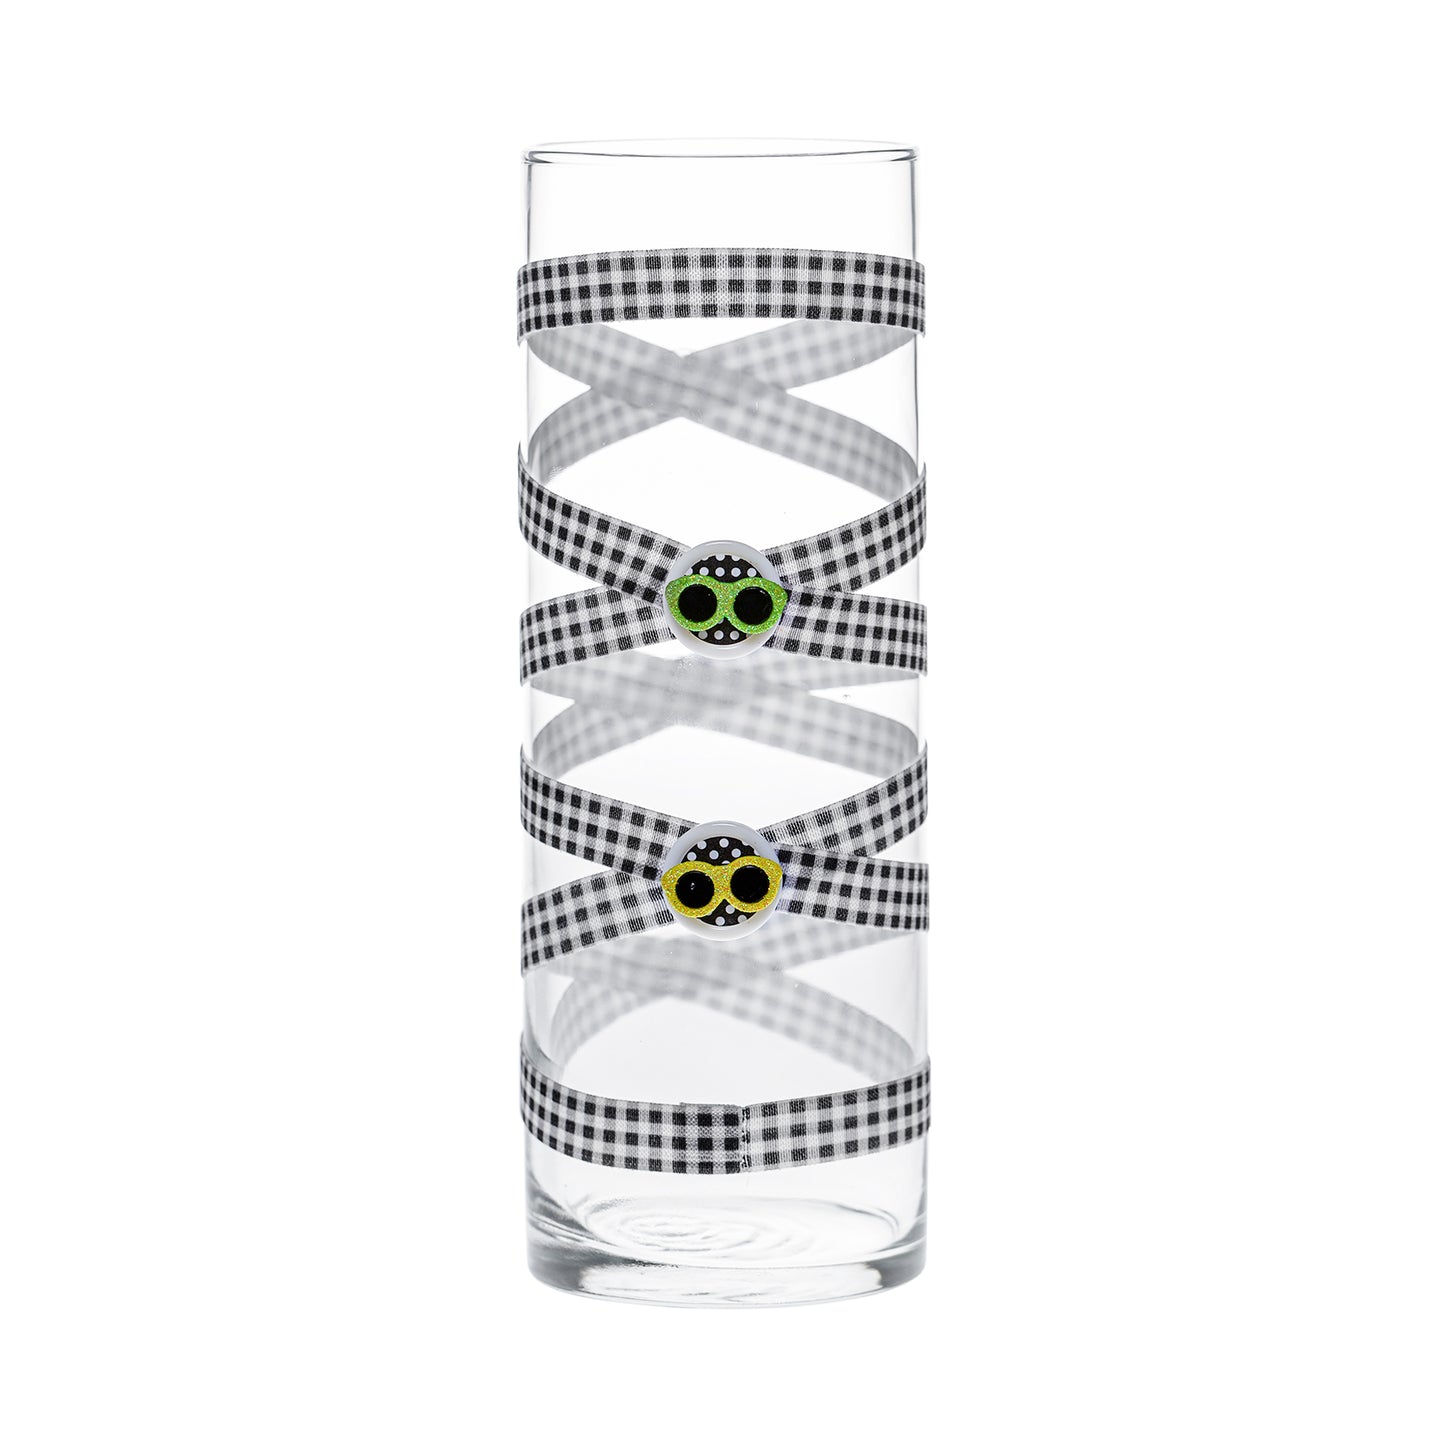 Back of Glass Wrappings 10" bud vase wrapped in black & white check elastic, decorated with 2 colorful sunglasses.